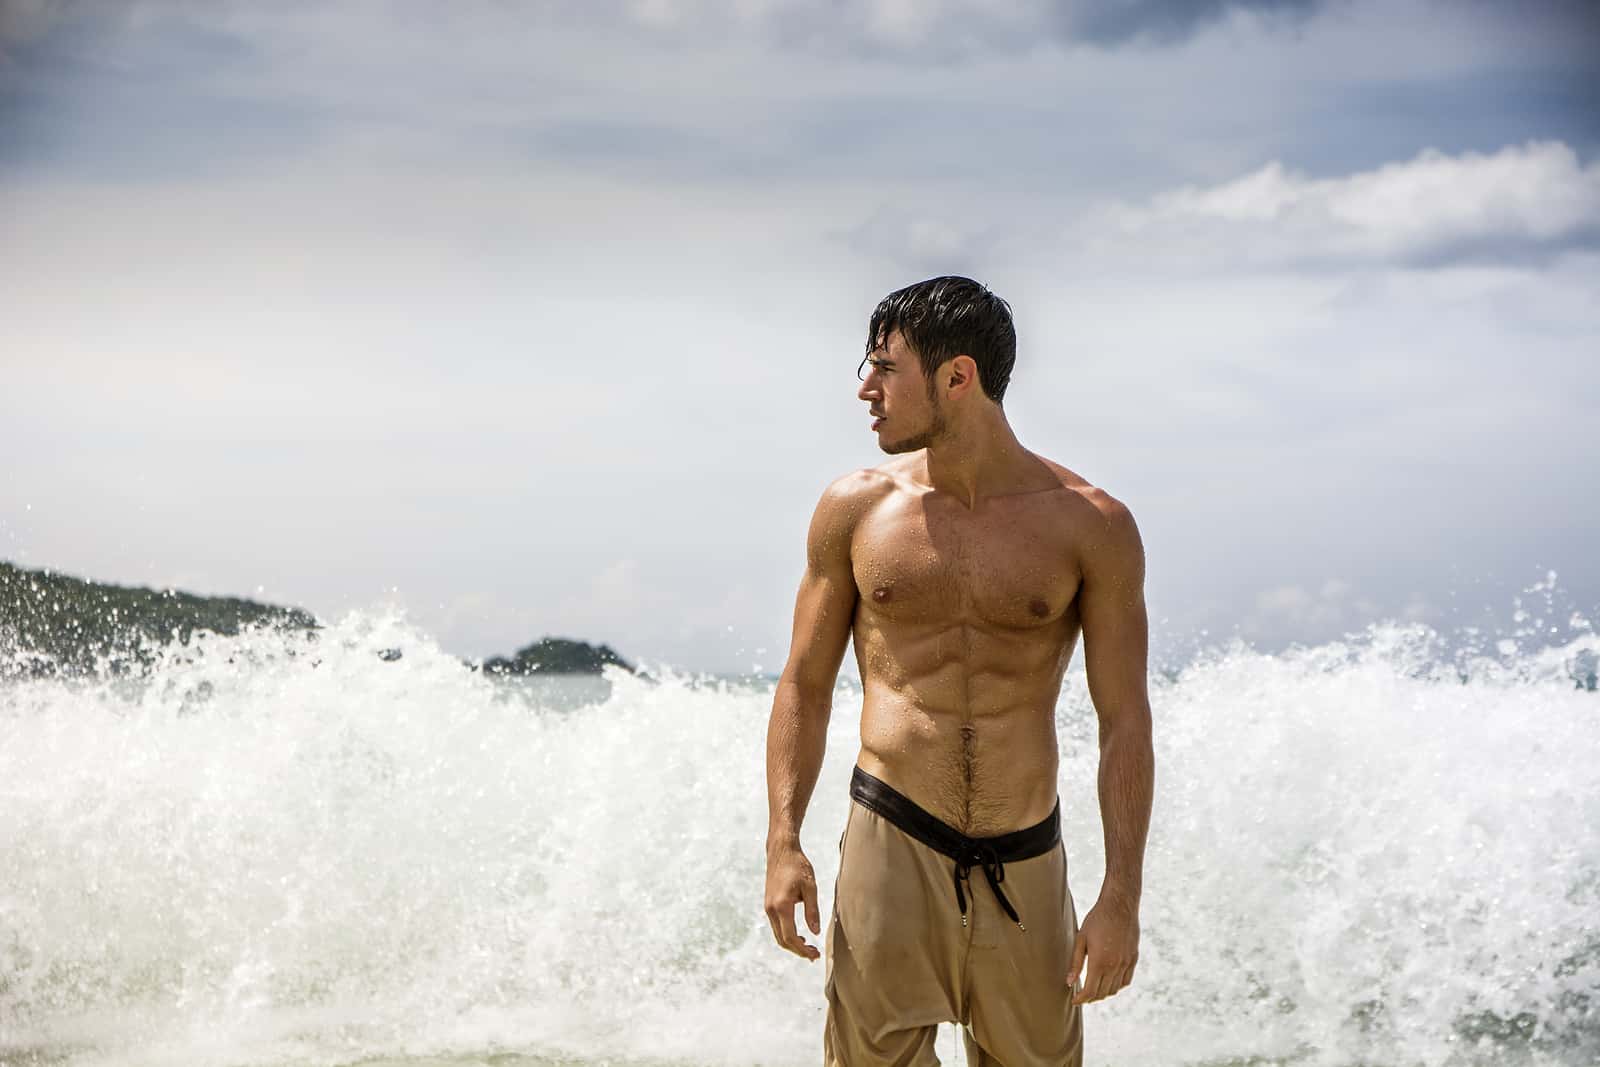 Guide to bathing suits for men